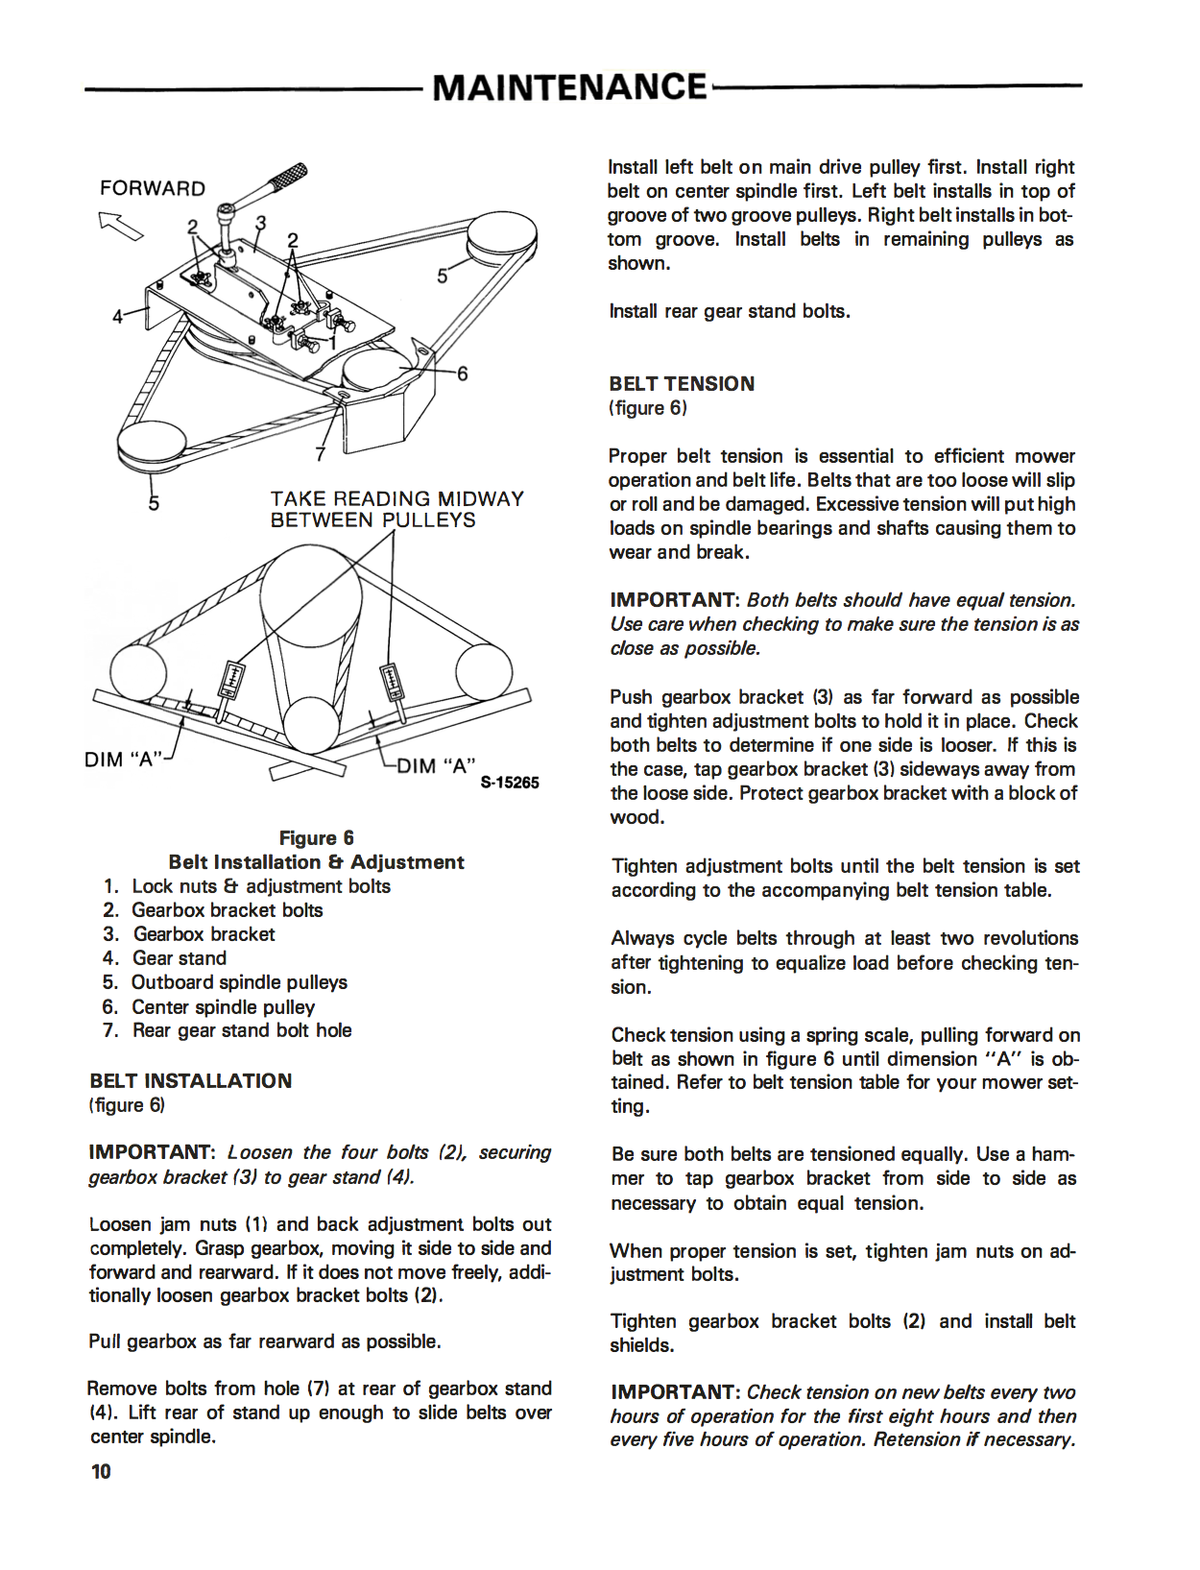 Ford Series 930-A Rear Mounted Rotary Mowers (48"-60"-72") - Operator's Manual. Ford 930 A mower.